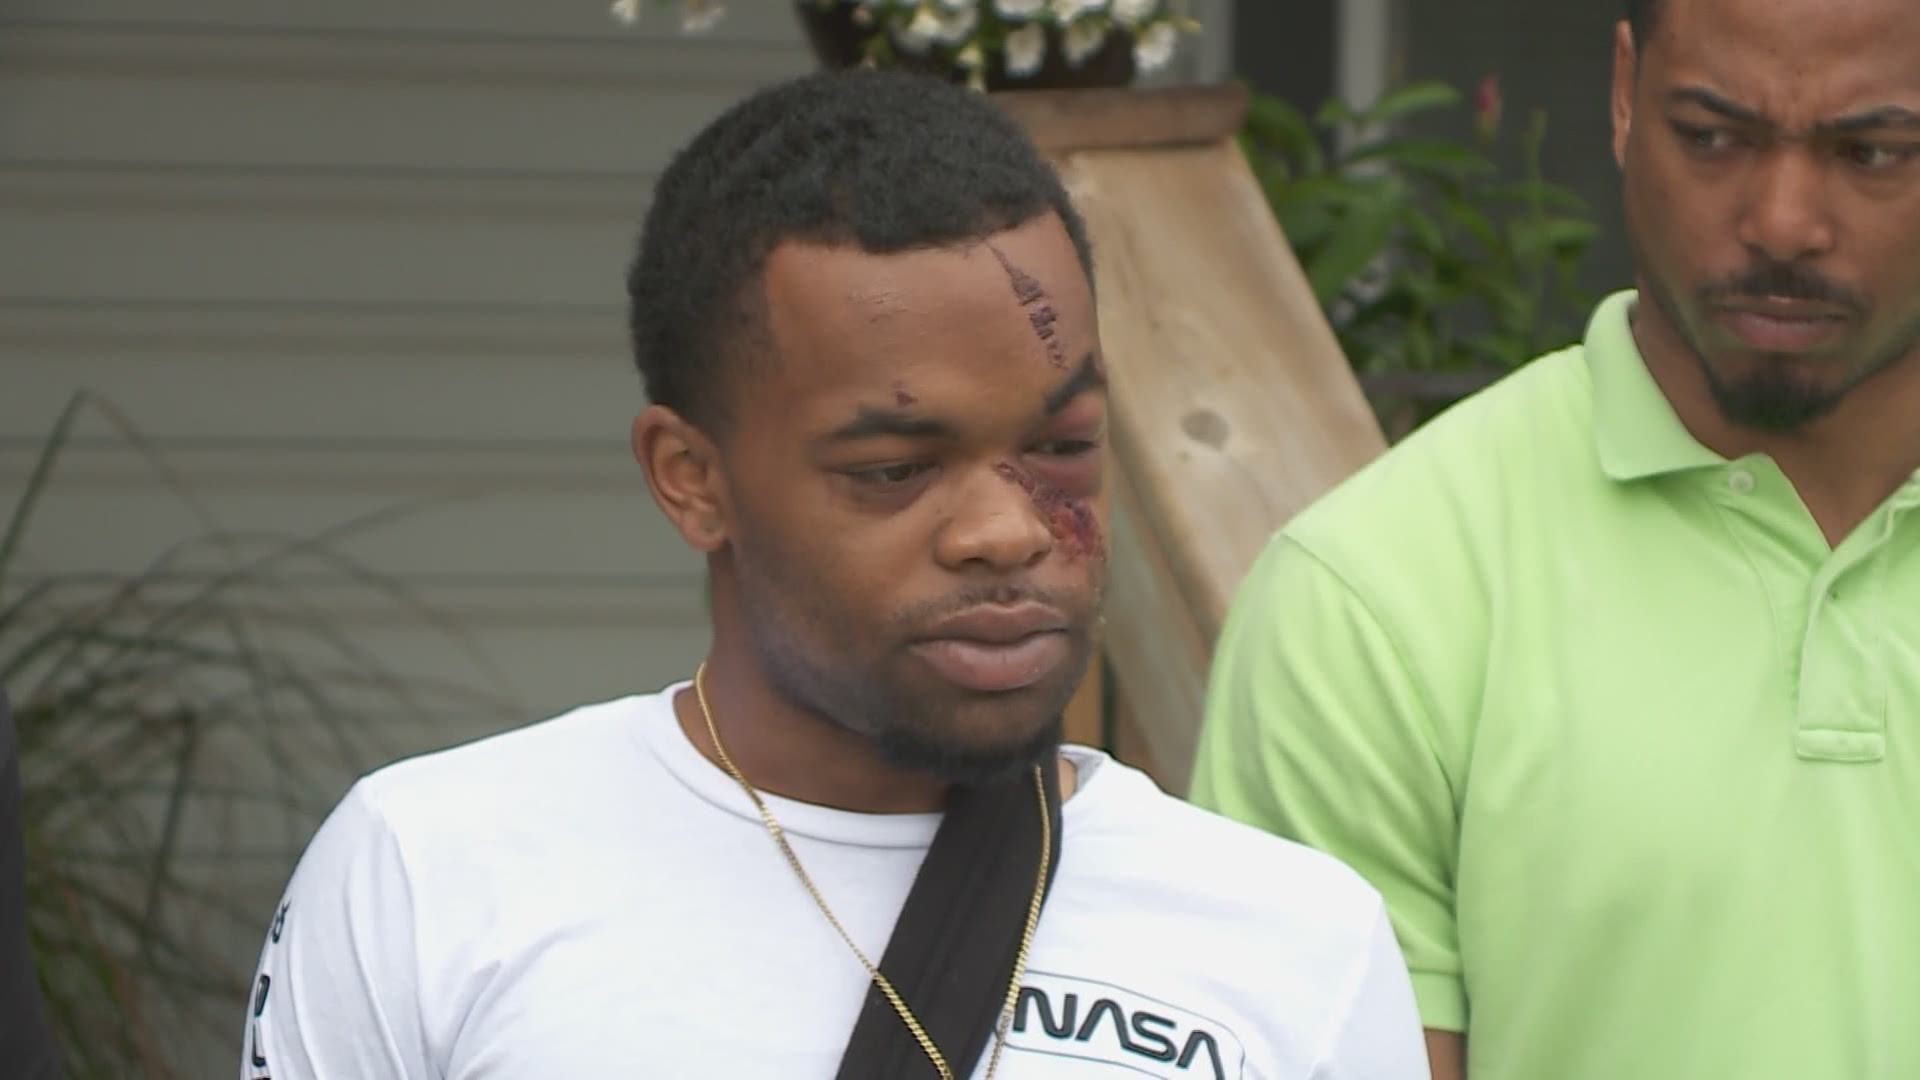 Darquan Jones, a young black man, was walking to see his girlfriend early Saturday morning when he was jumped by two white men, one of which shouted racial slurs.